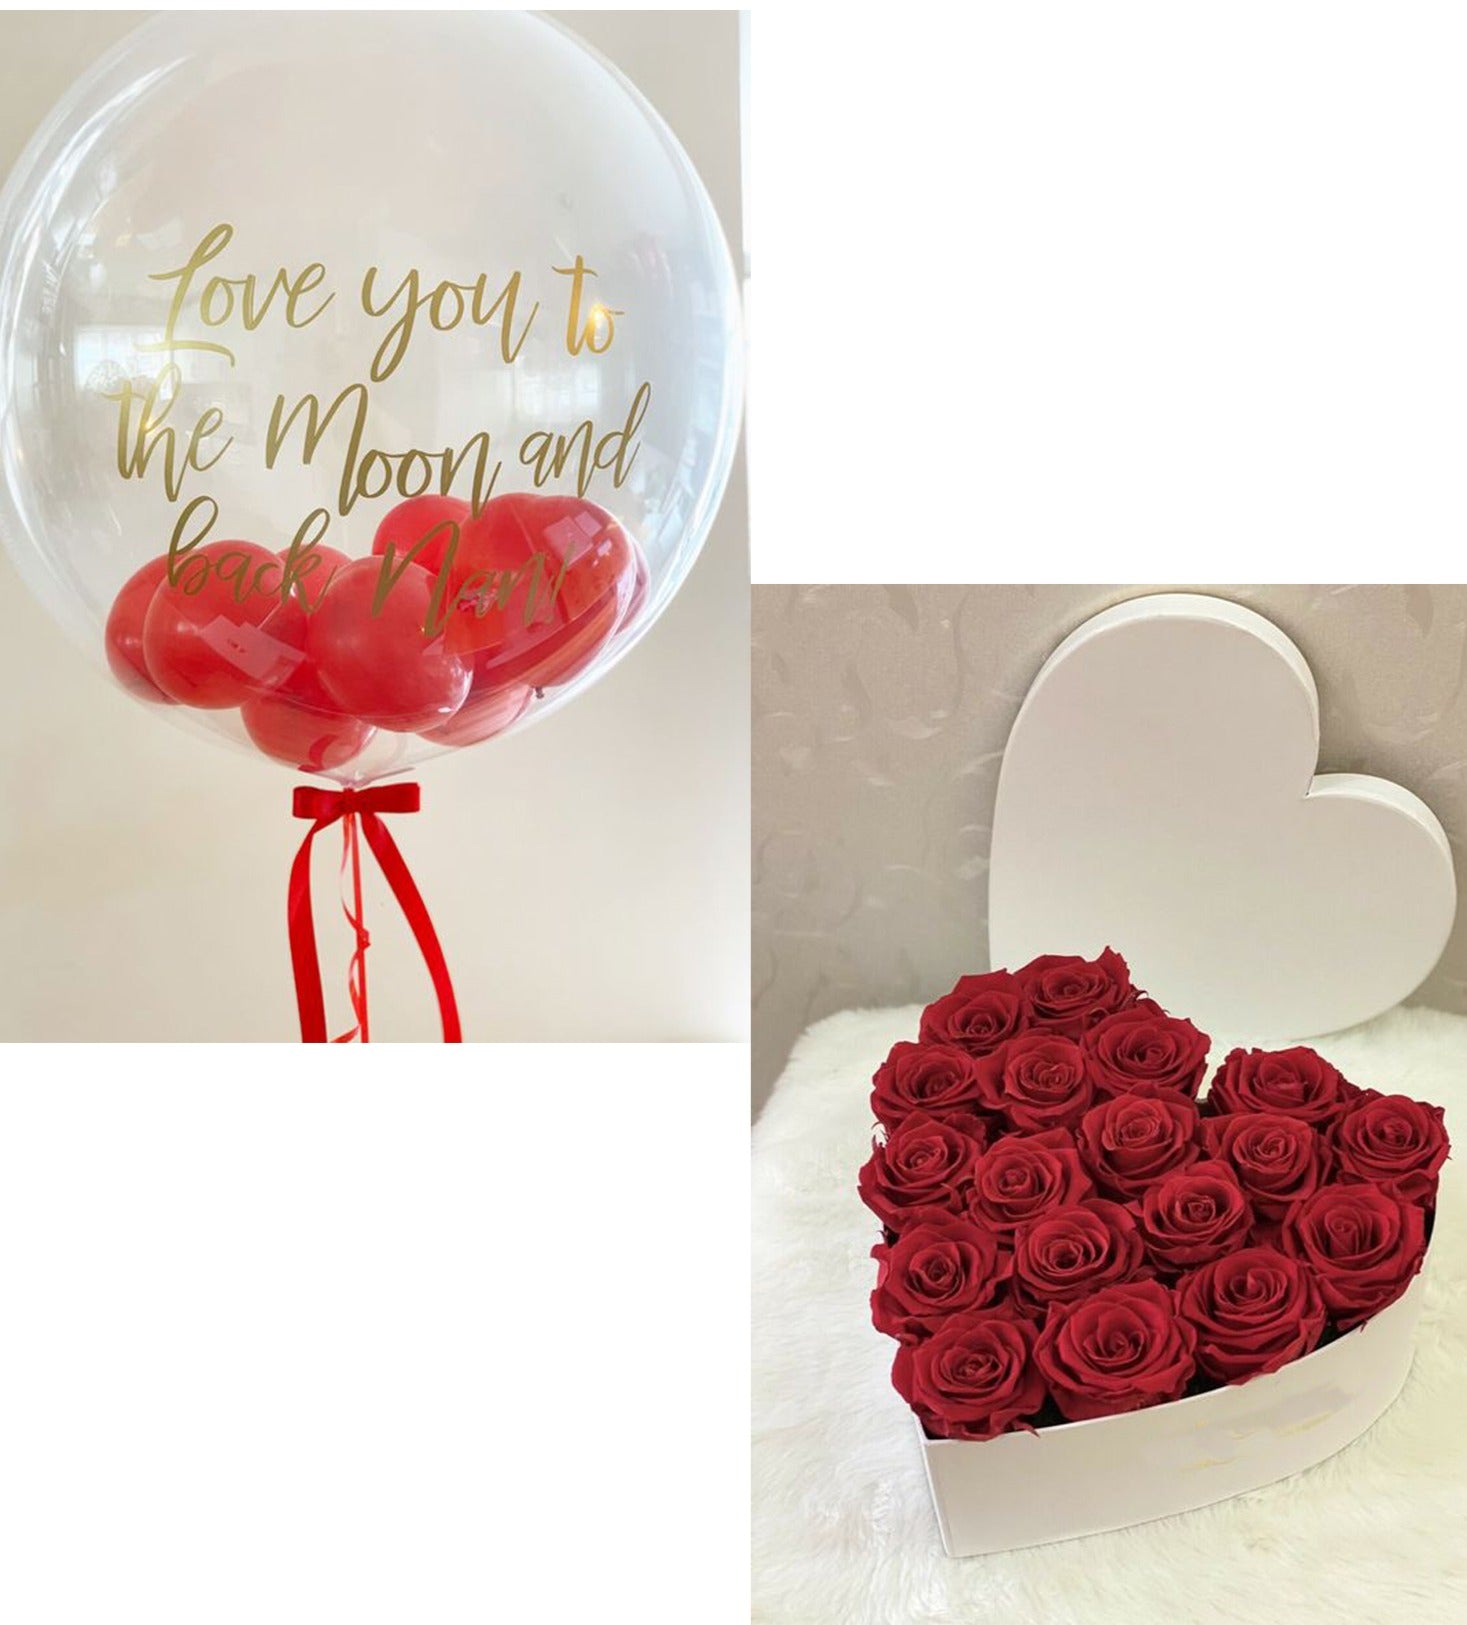 Customized bubble balloon with a heart of roses!!!